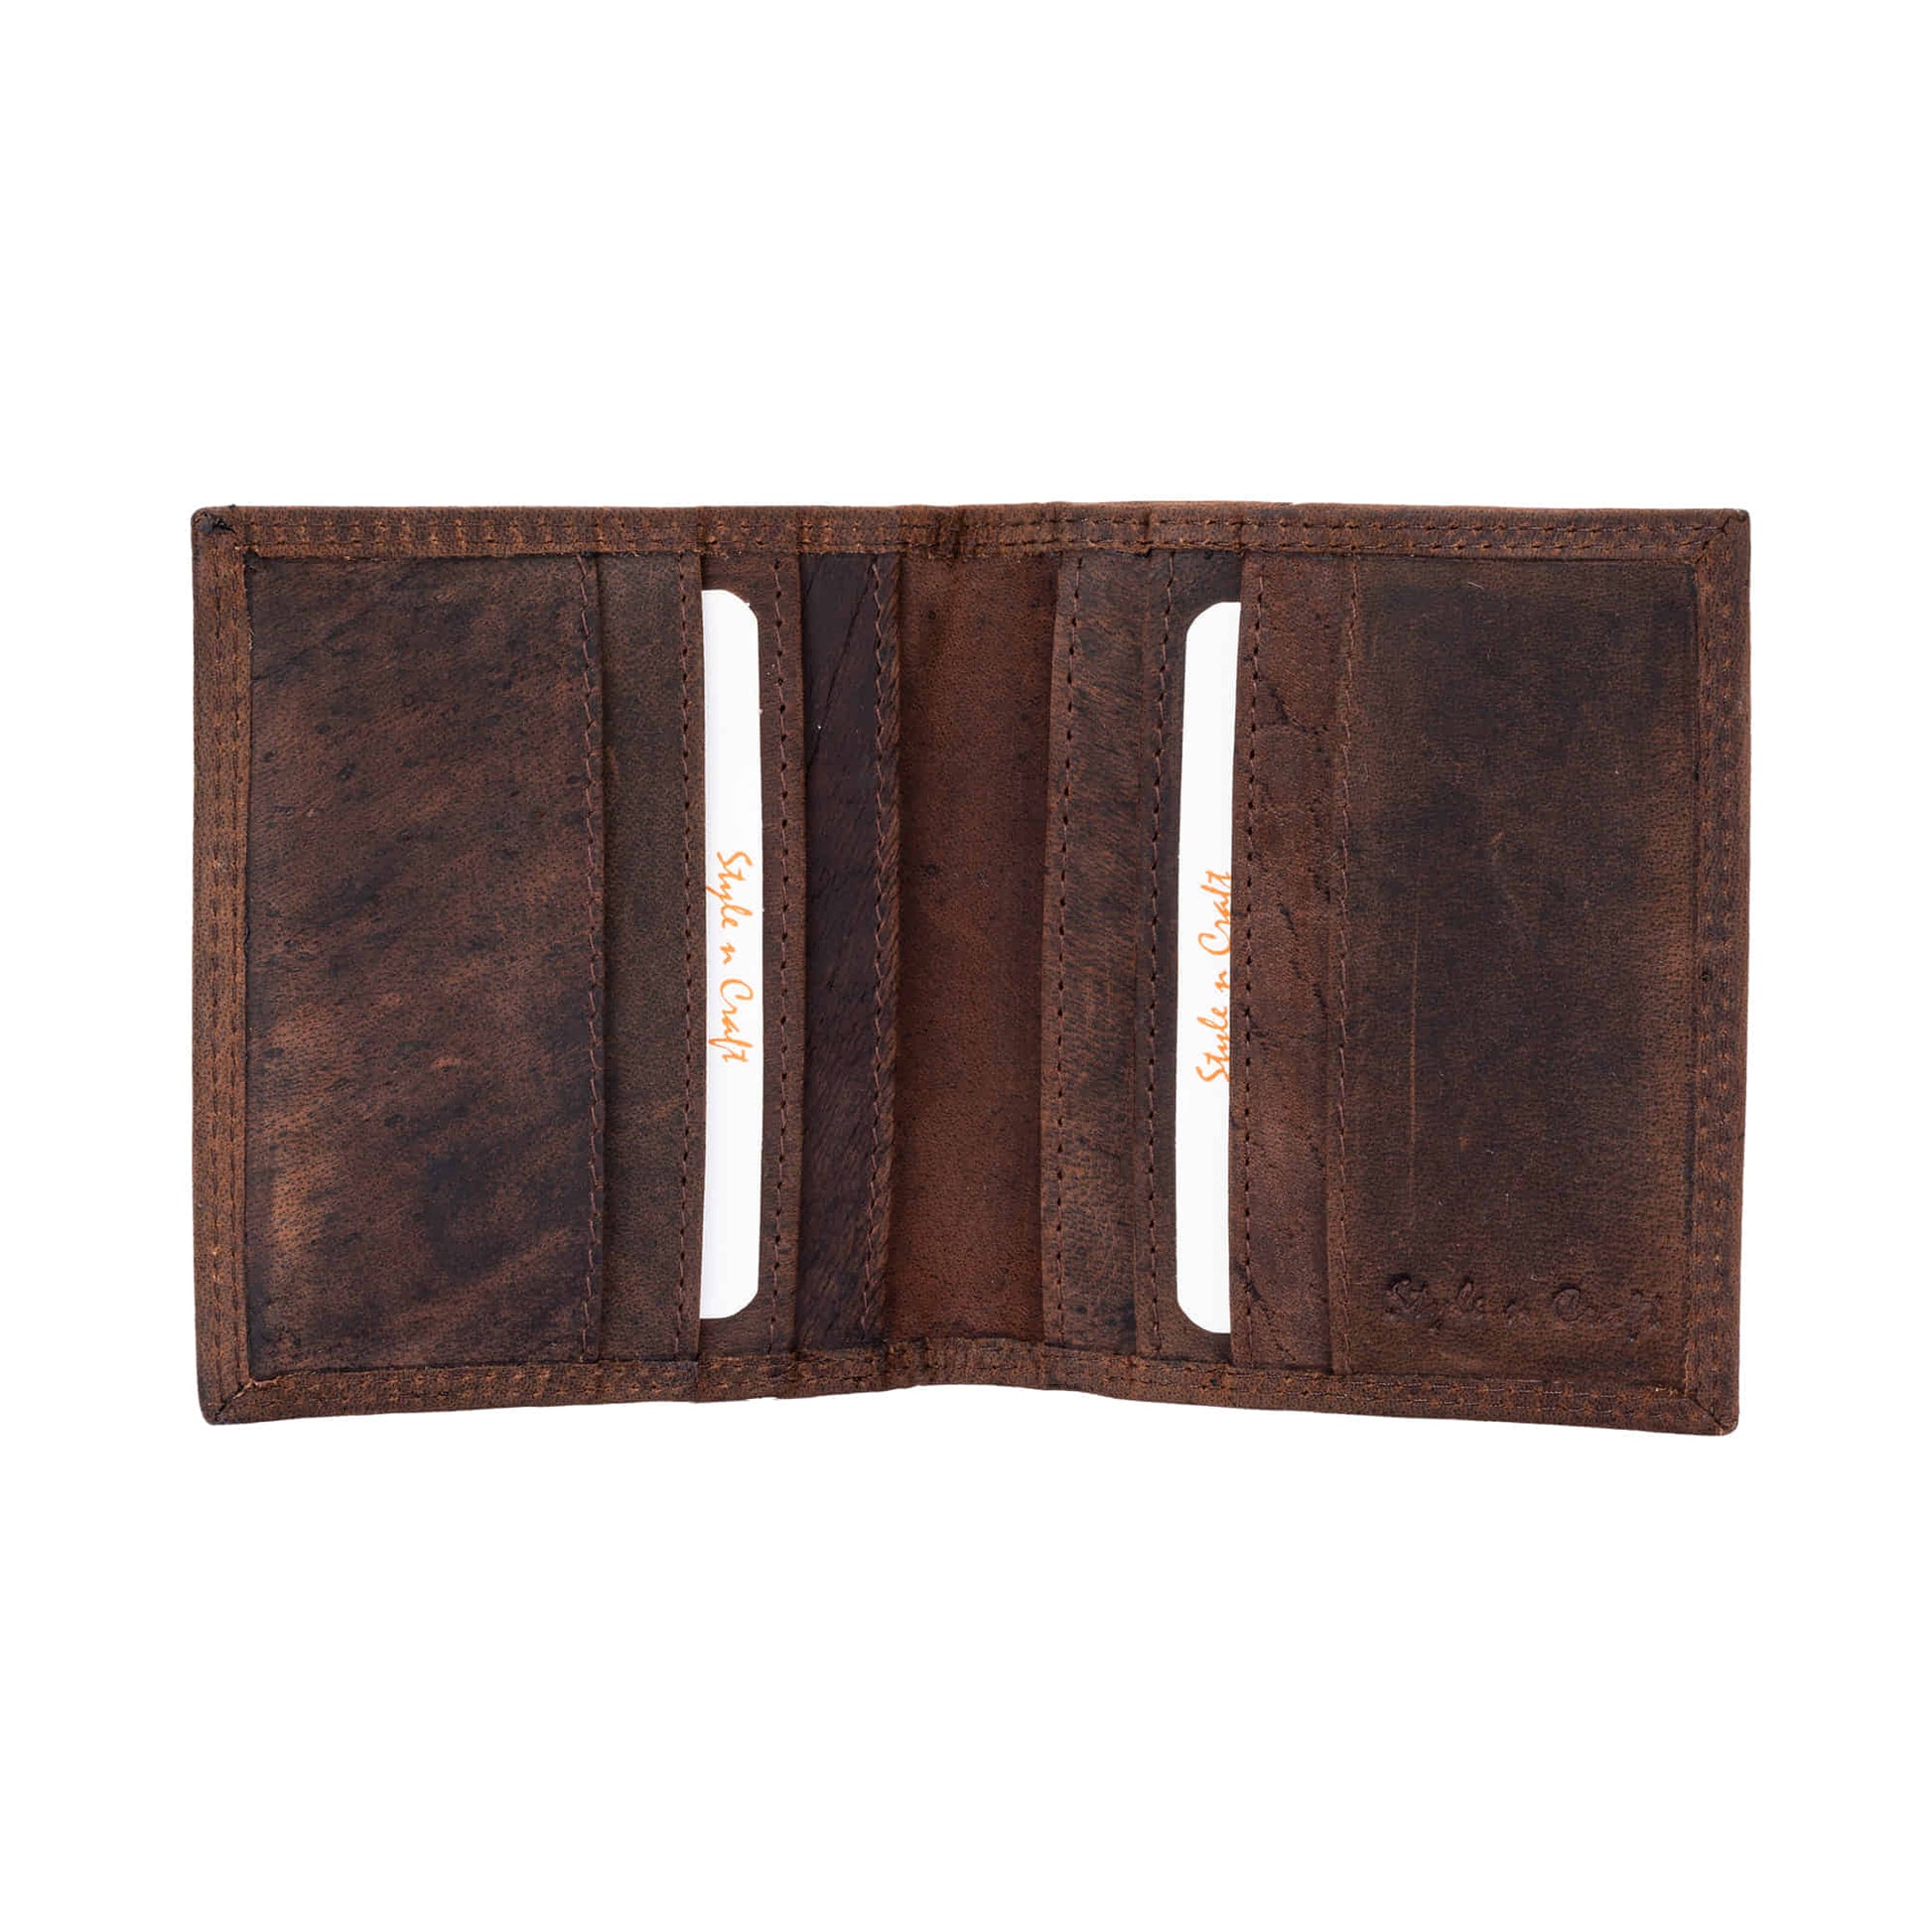 Style n Craft 300703-BR Credit Card / Business Card Case in Brown Leather with Vintage like 2 Tone Effect & Double Stitching on the outside. It has RFID Protection. Open View Showing the Interior Pockets